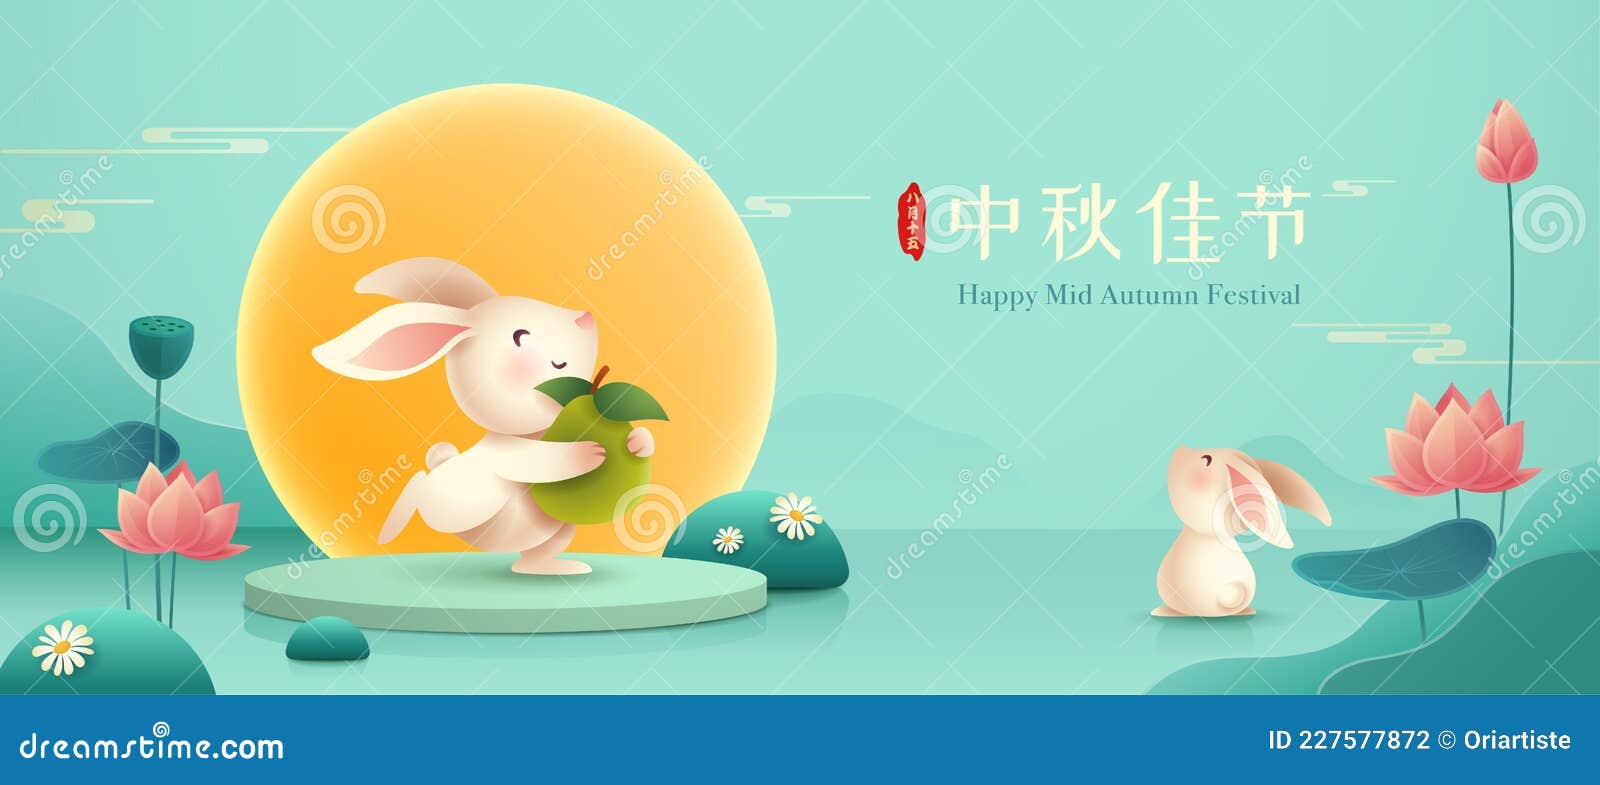 3d  of mid autumn mooncake festival theme with cute rabbit character on podium and paper graphic style of lotus lily p